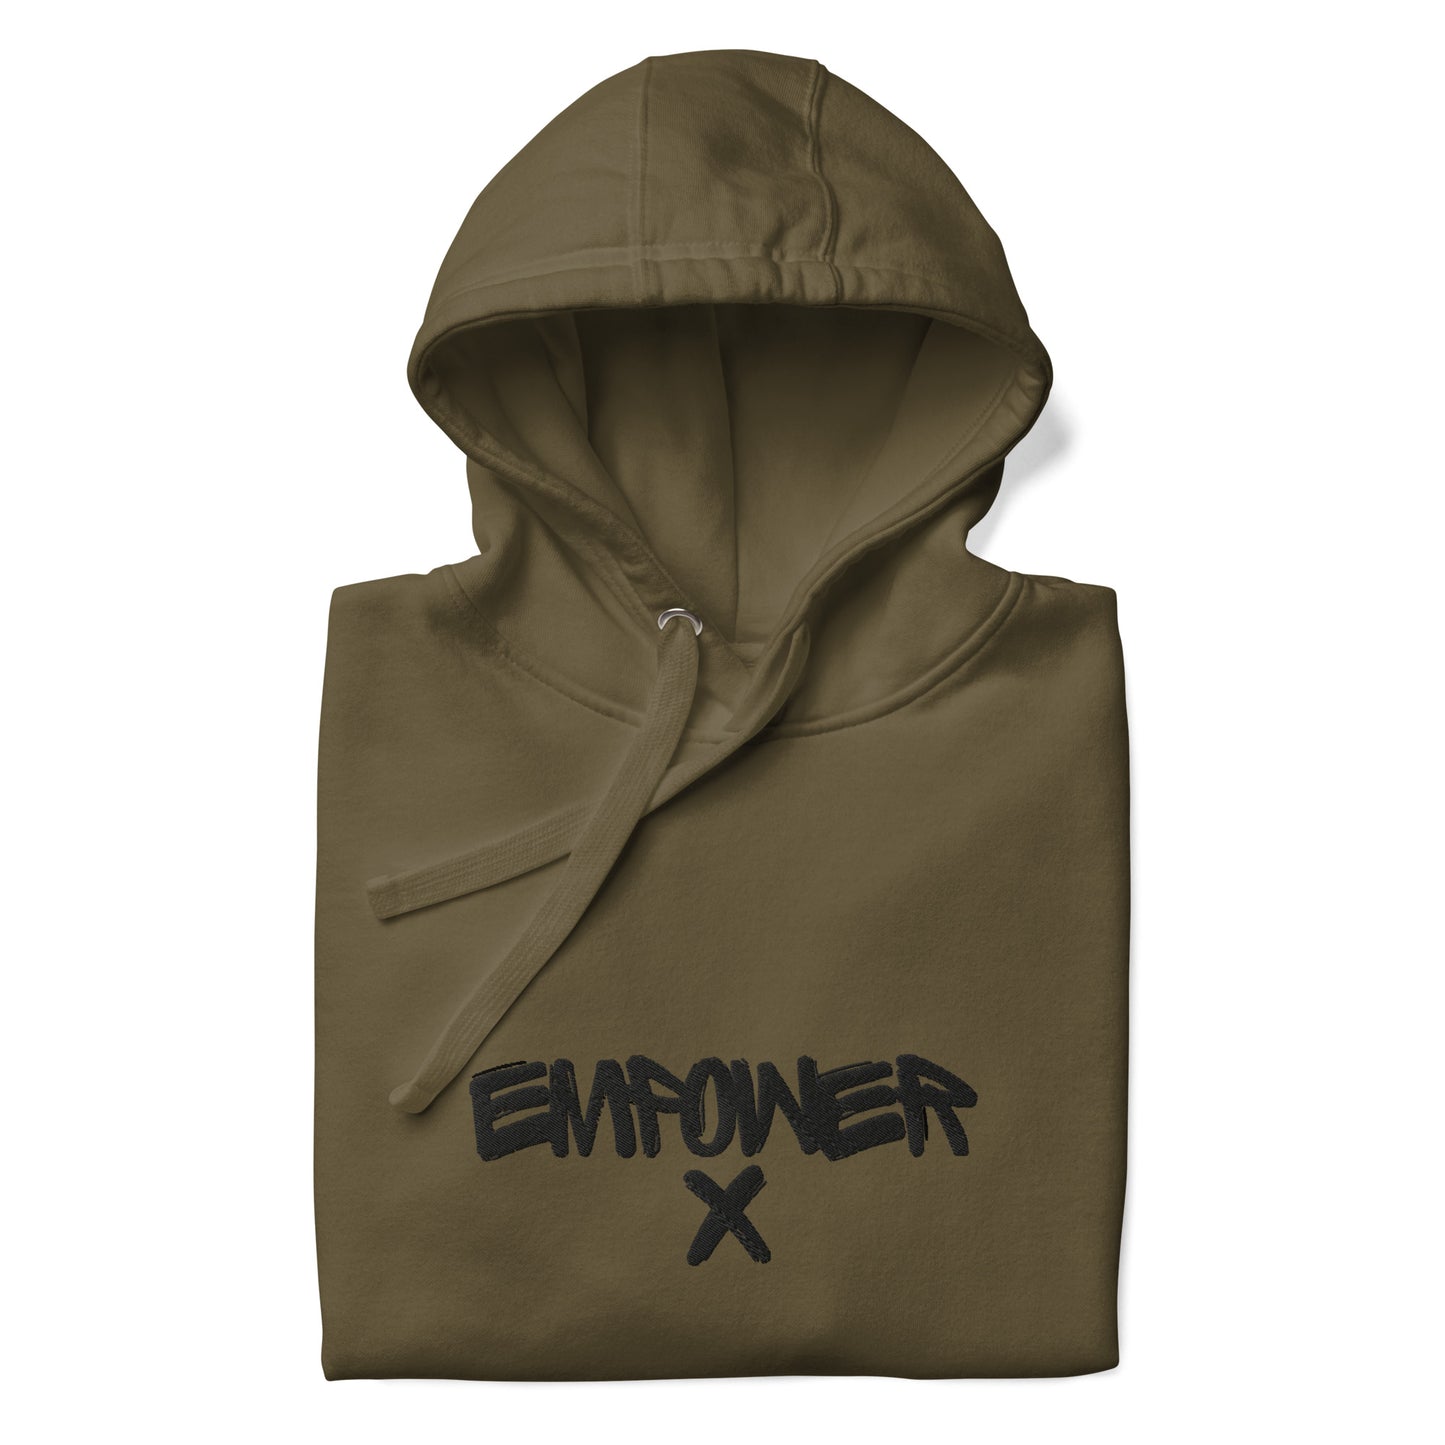 Khaki Green Empower X First Edition Series Black Embroidered Men's Mental Health Hoodie